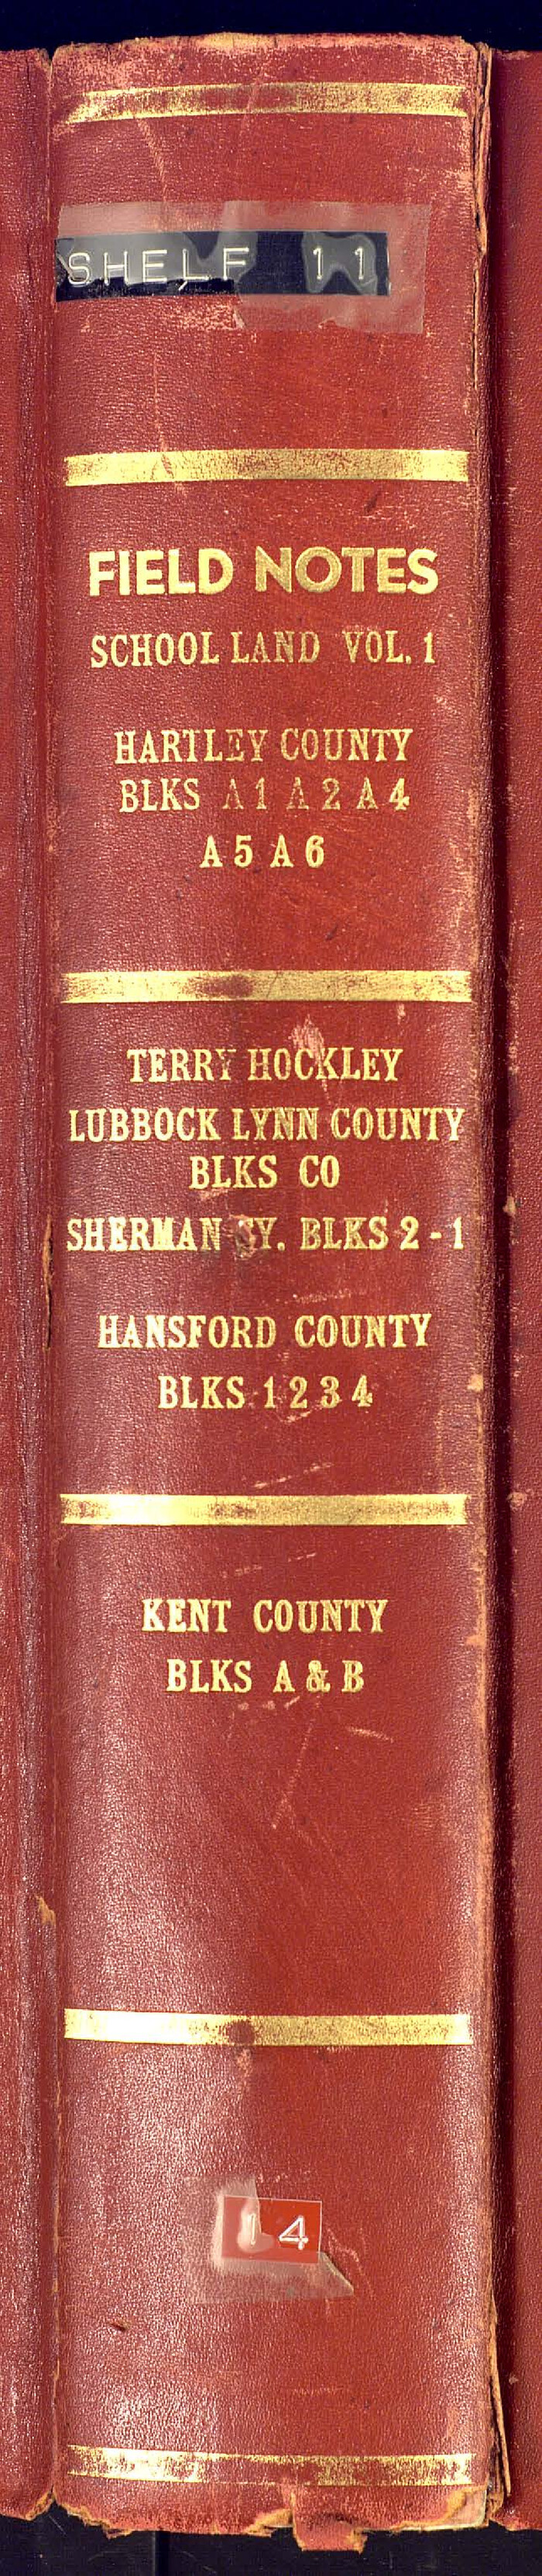 81655, PSL Field Notes for Blocks 1 and 2, Hansford and Sherman Counties, Blocks 3 and 4, Hansford County, Blocks A1, A2, A4, A5, and A6 in Hartley County, Block C0 in Hockley, Lubbock, Lynn, and Terry Counties, and Blocks A and B in Kent County, General Map Collection